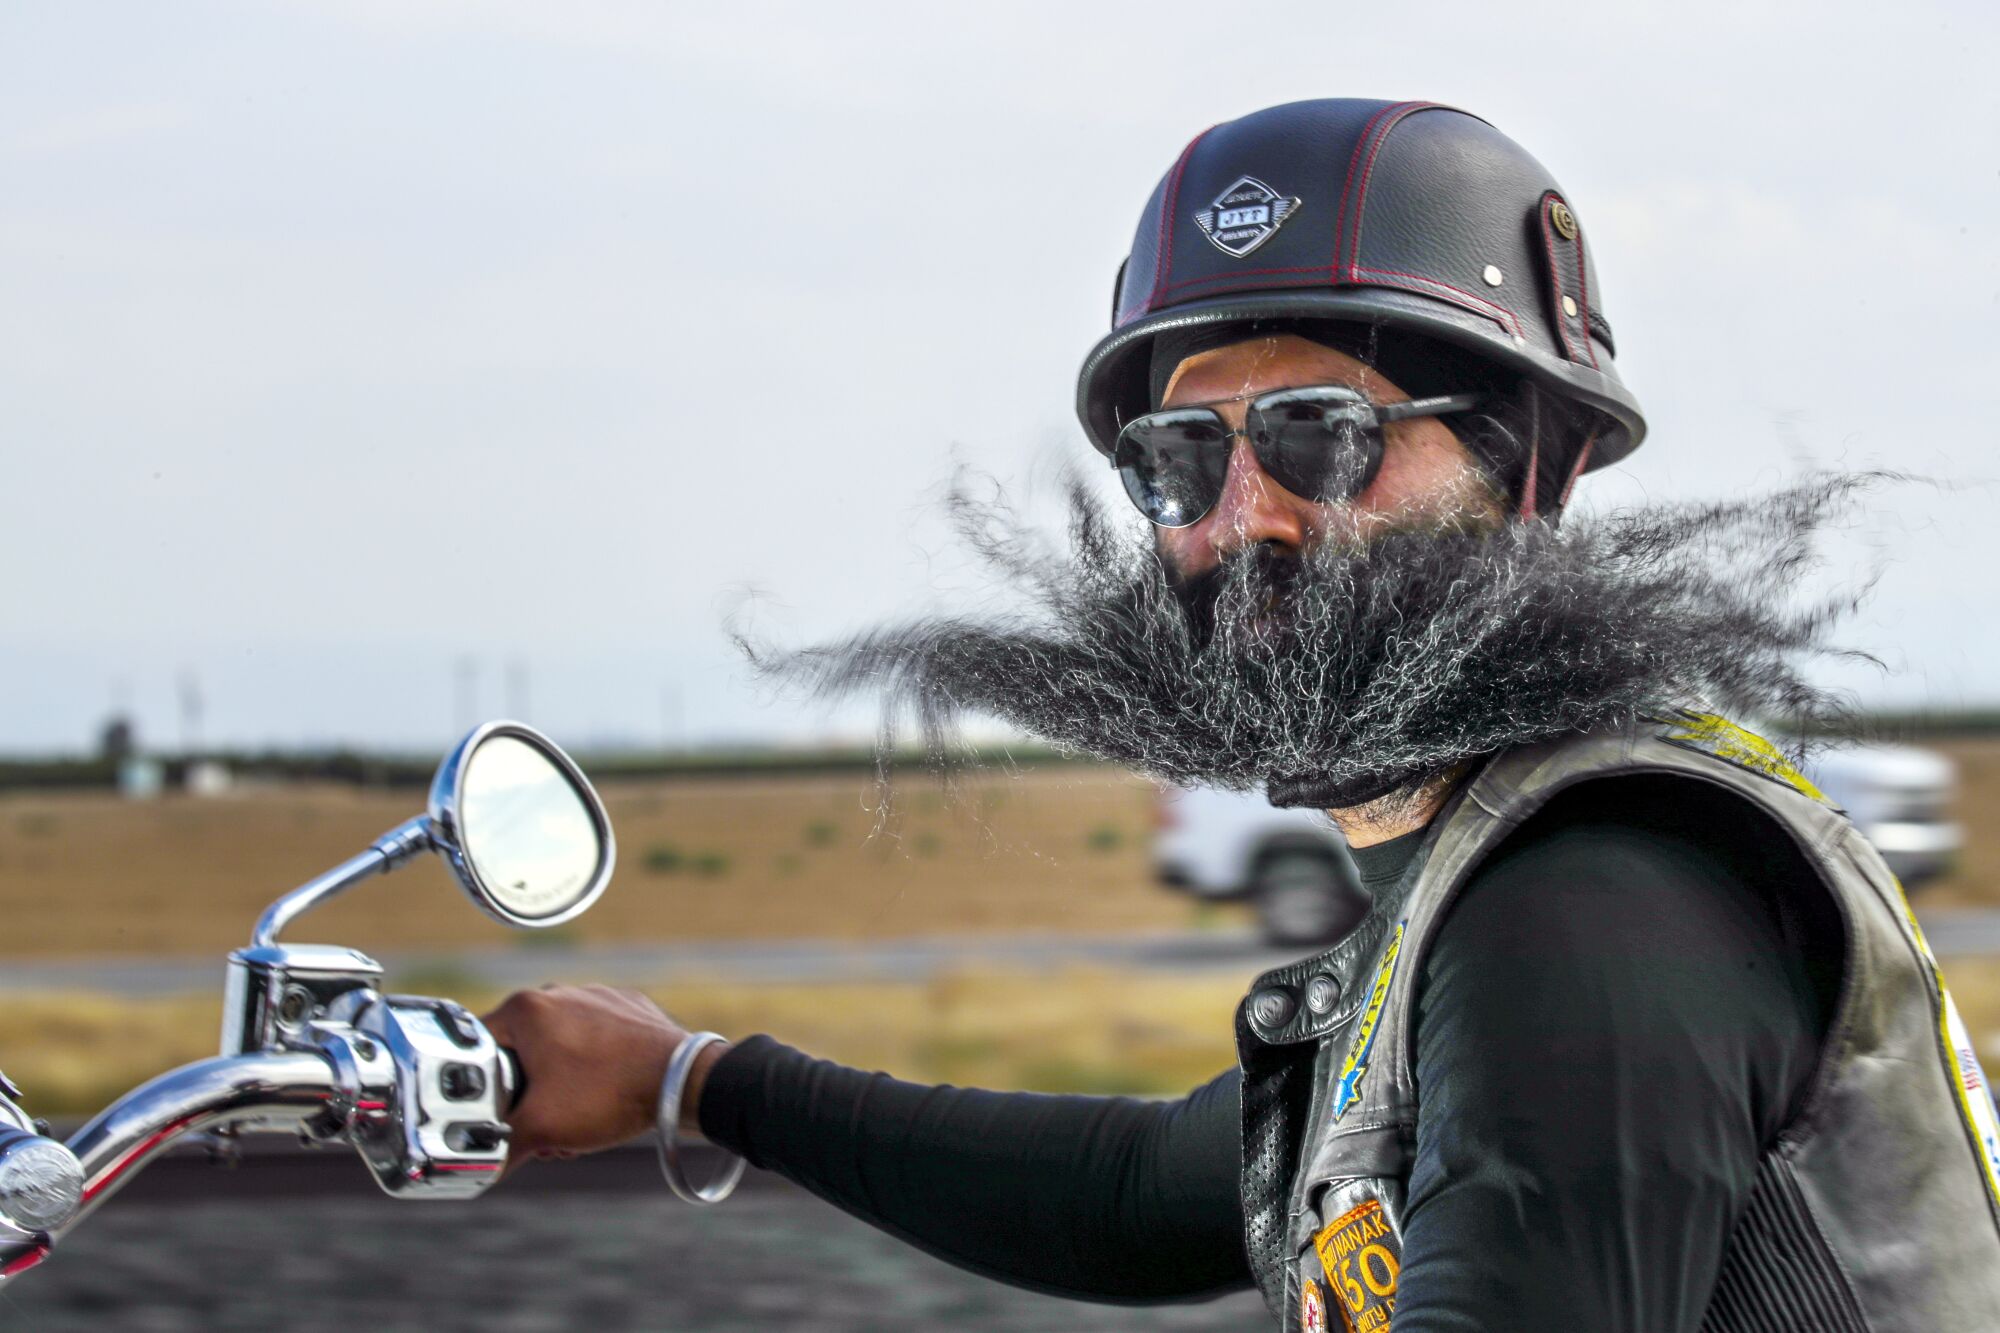 A man, wearing a leather vest and helmet, with a long salt-and-pepper beard looks at the camera while riding a motorbike